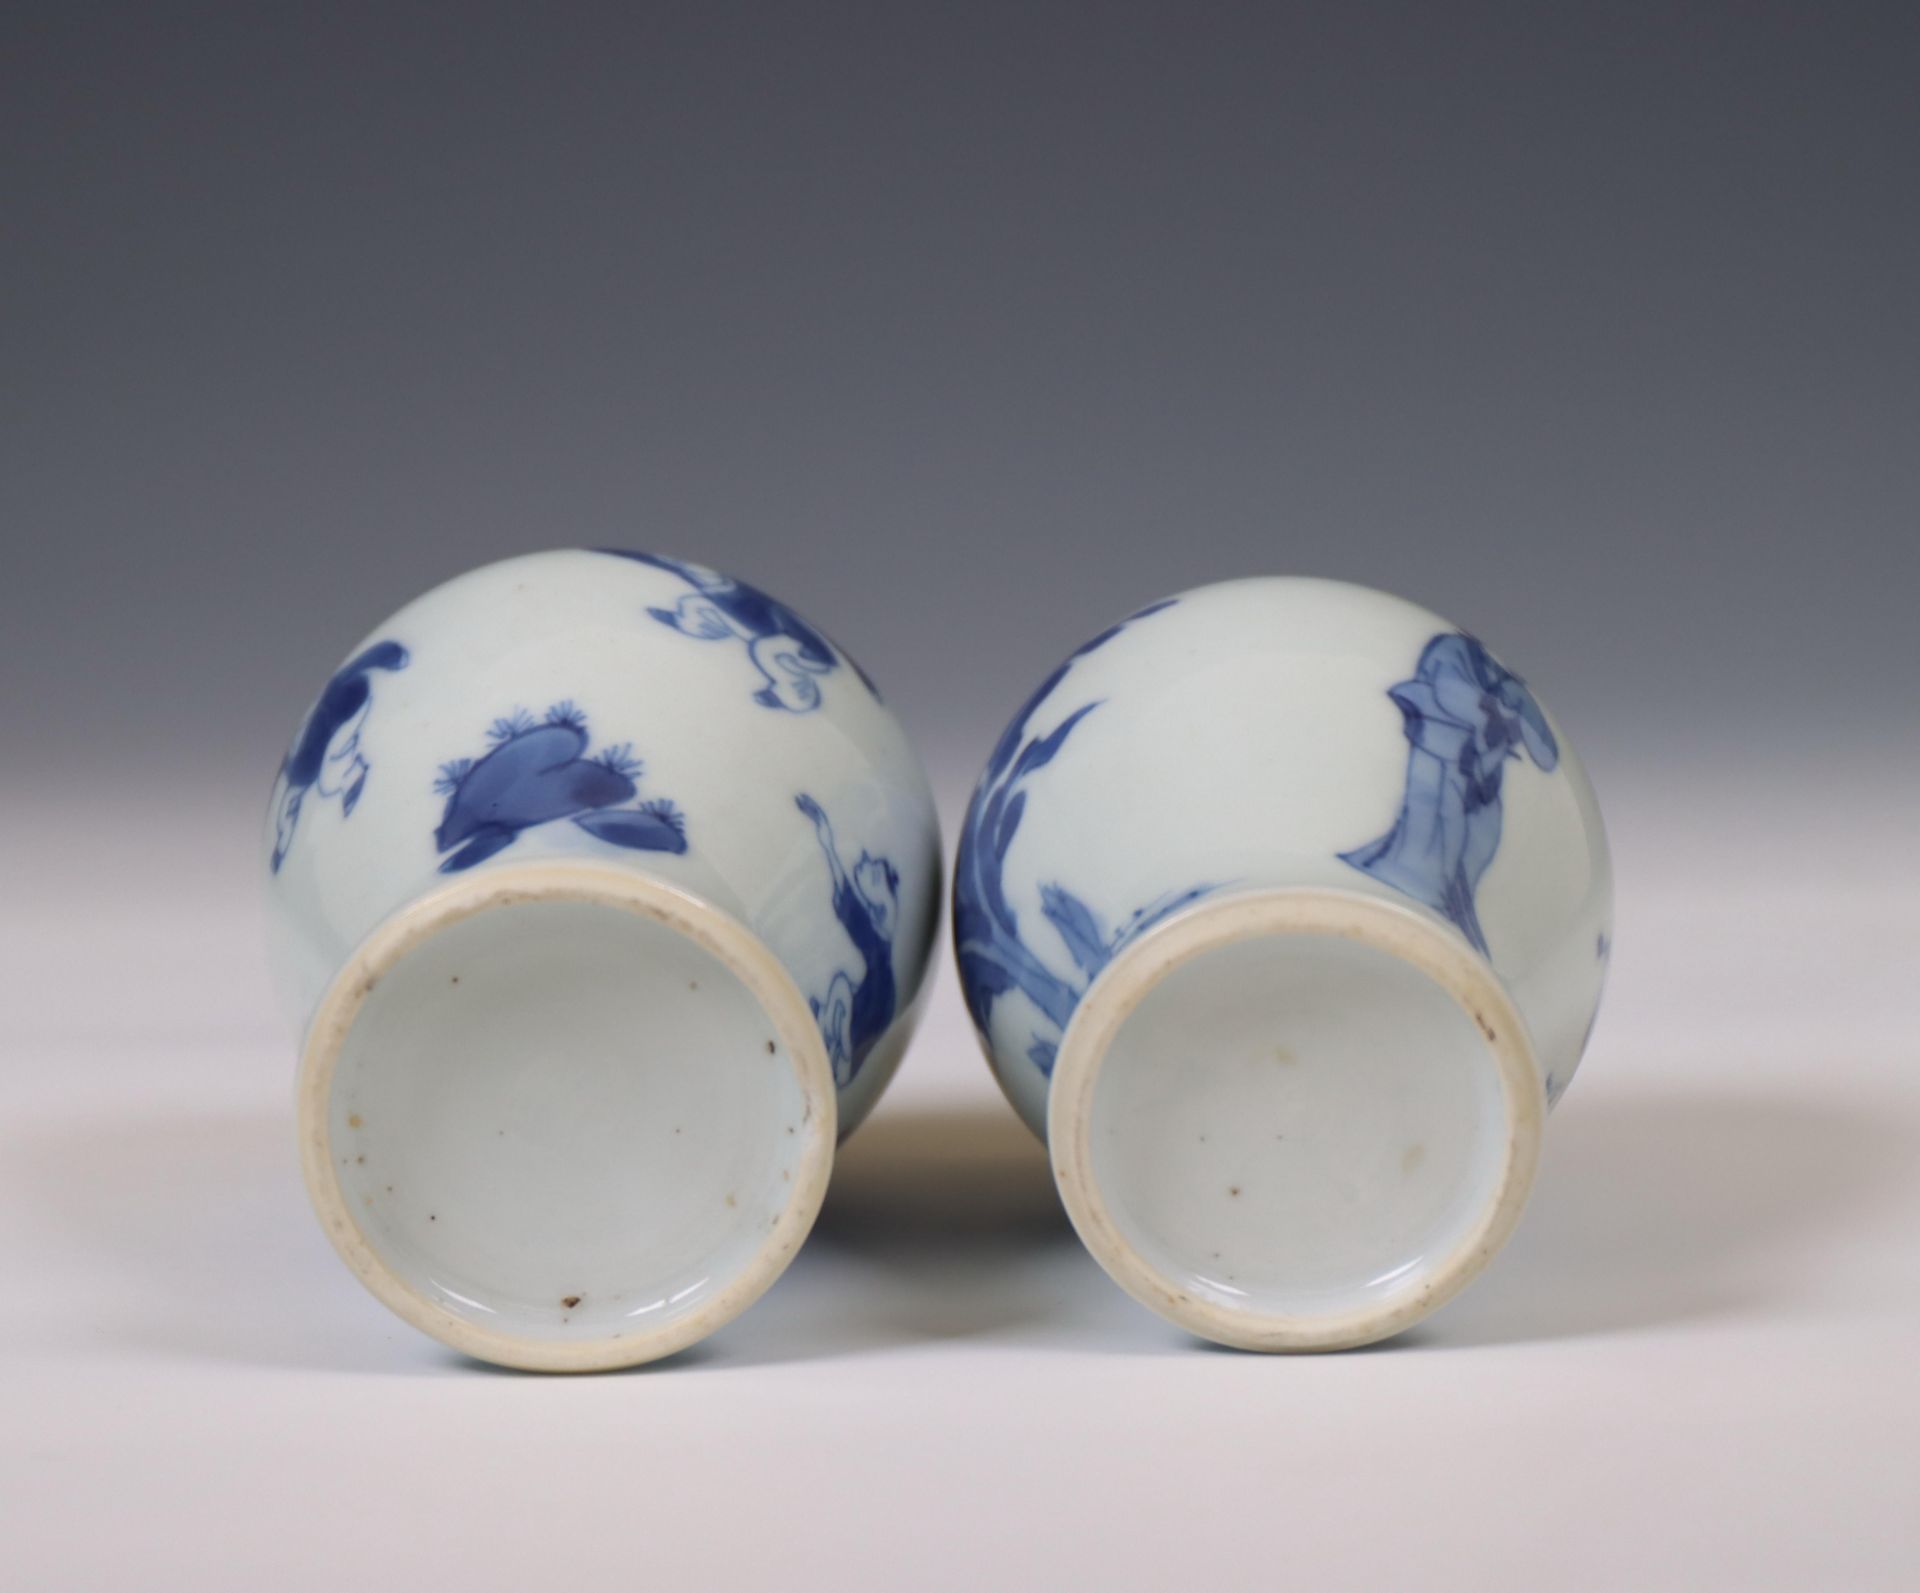 China, two blue and white porcelain jarlets, Kangxi period (1662-1722), - Image 5 of 6